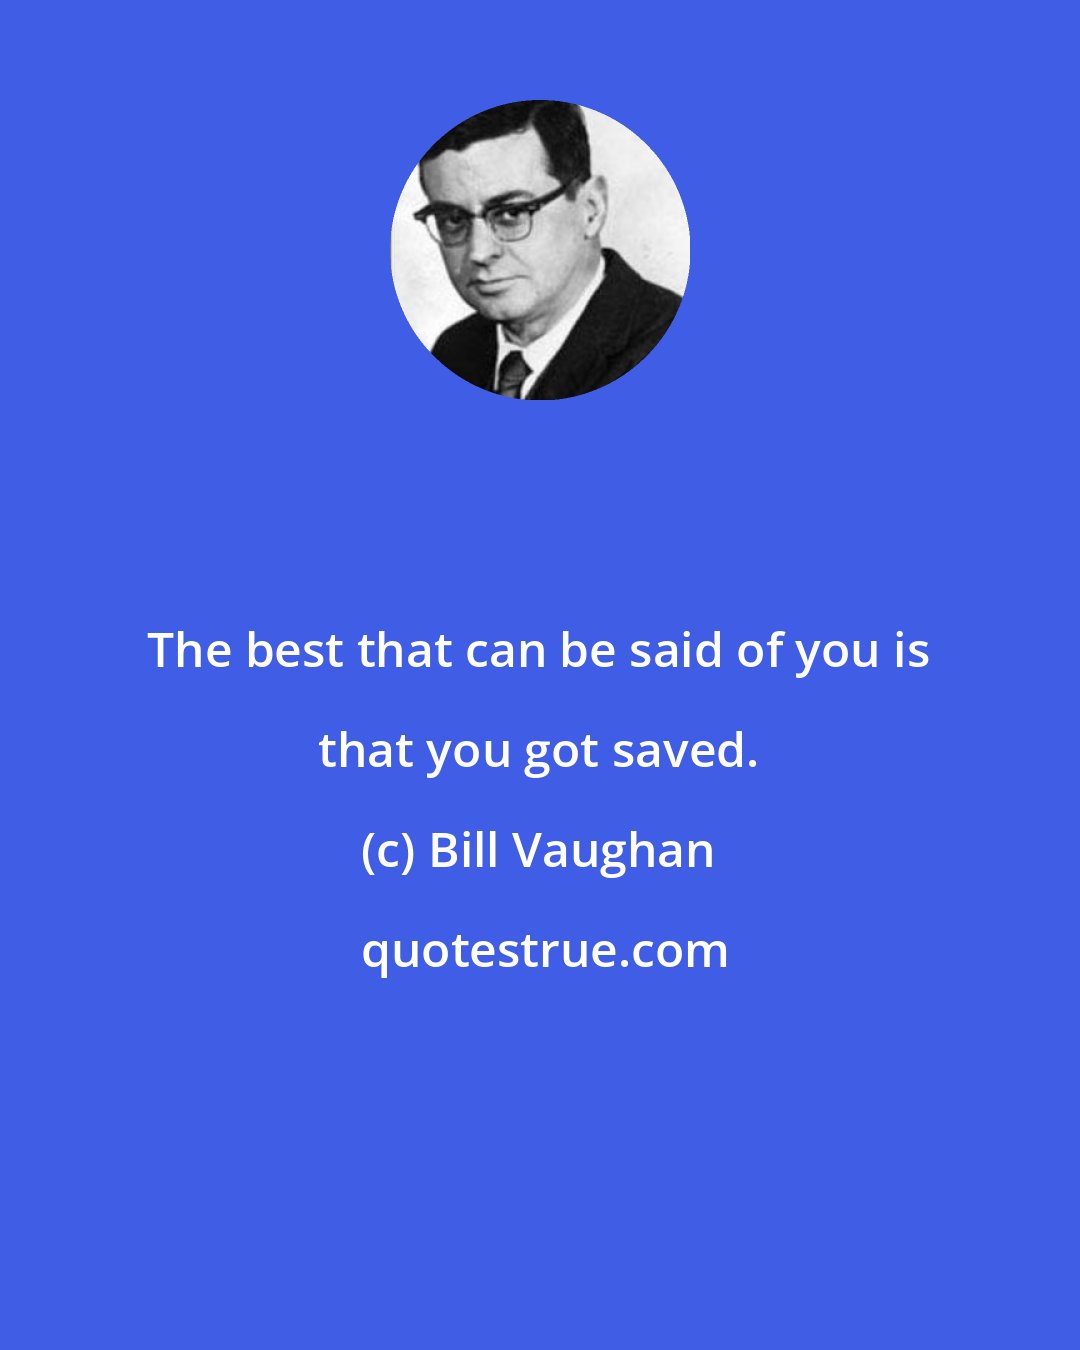 Bill Vaughan: The best that can be said of you is that you got saved.